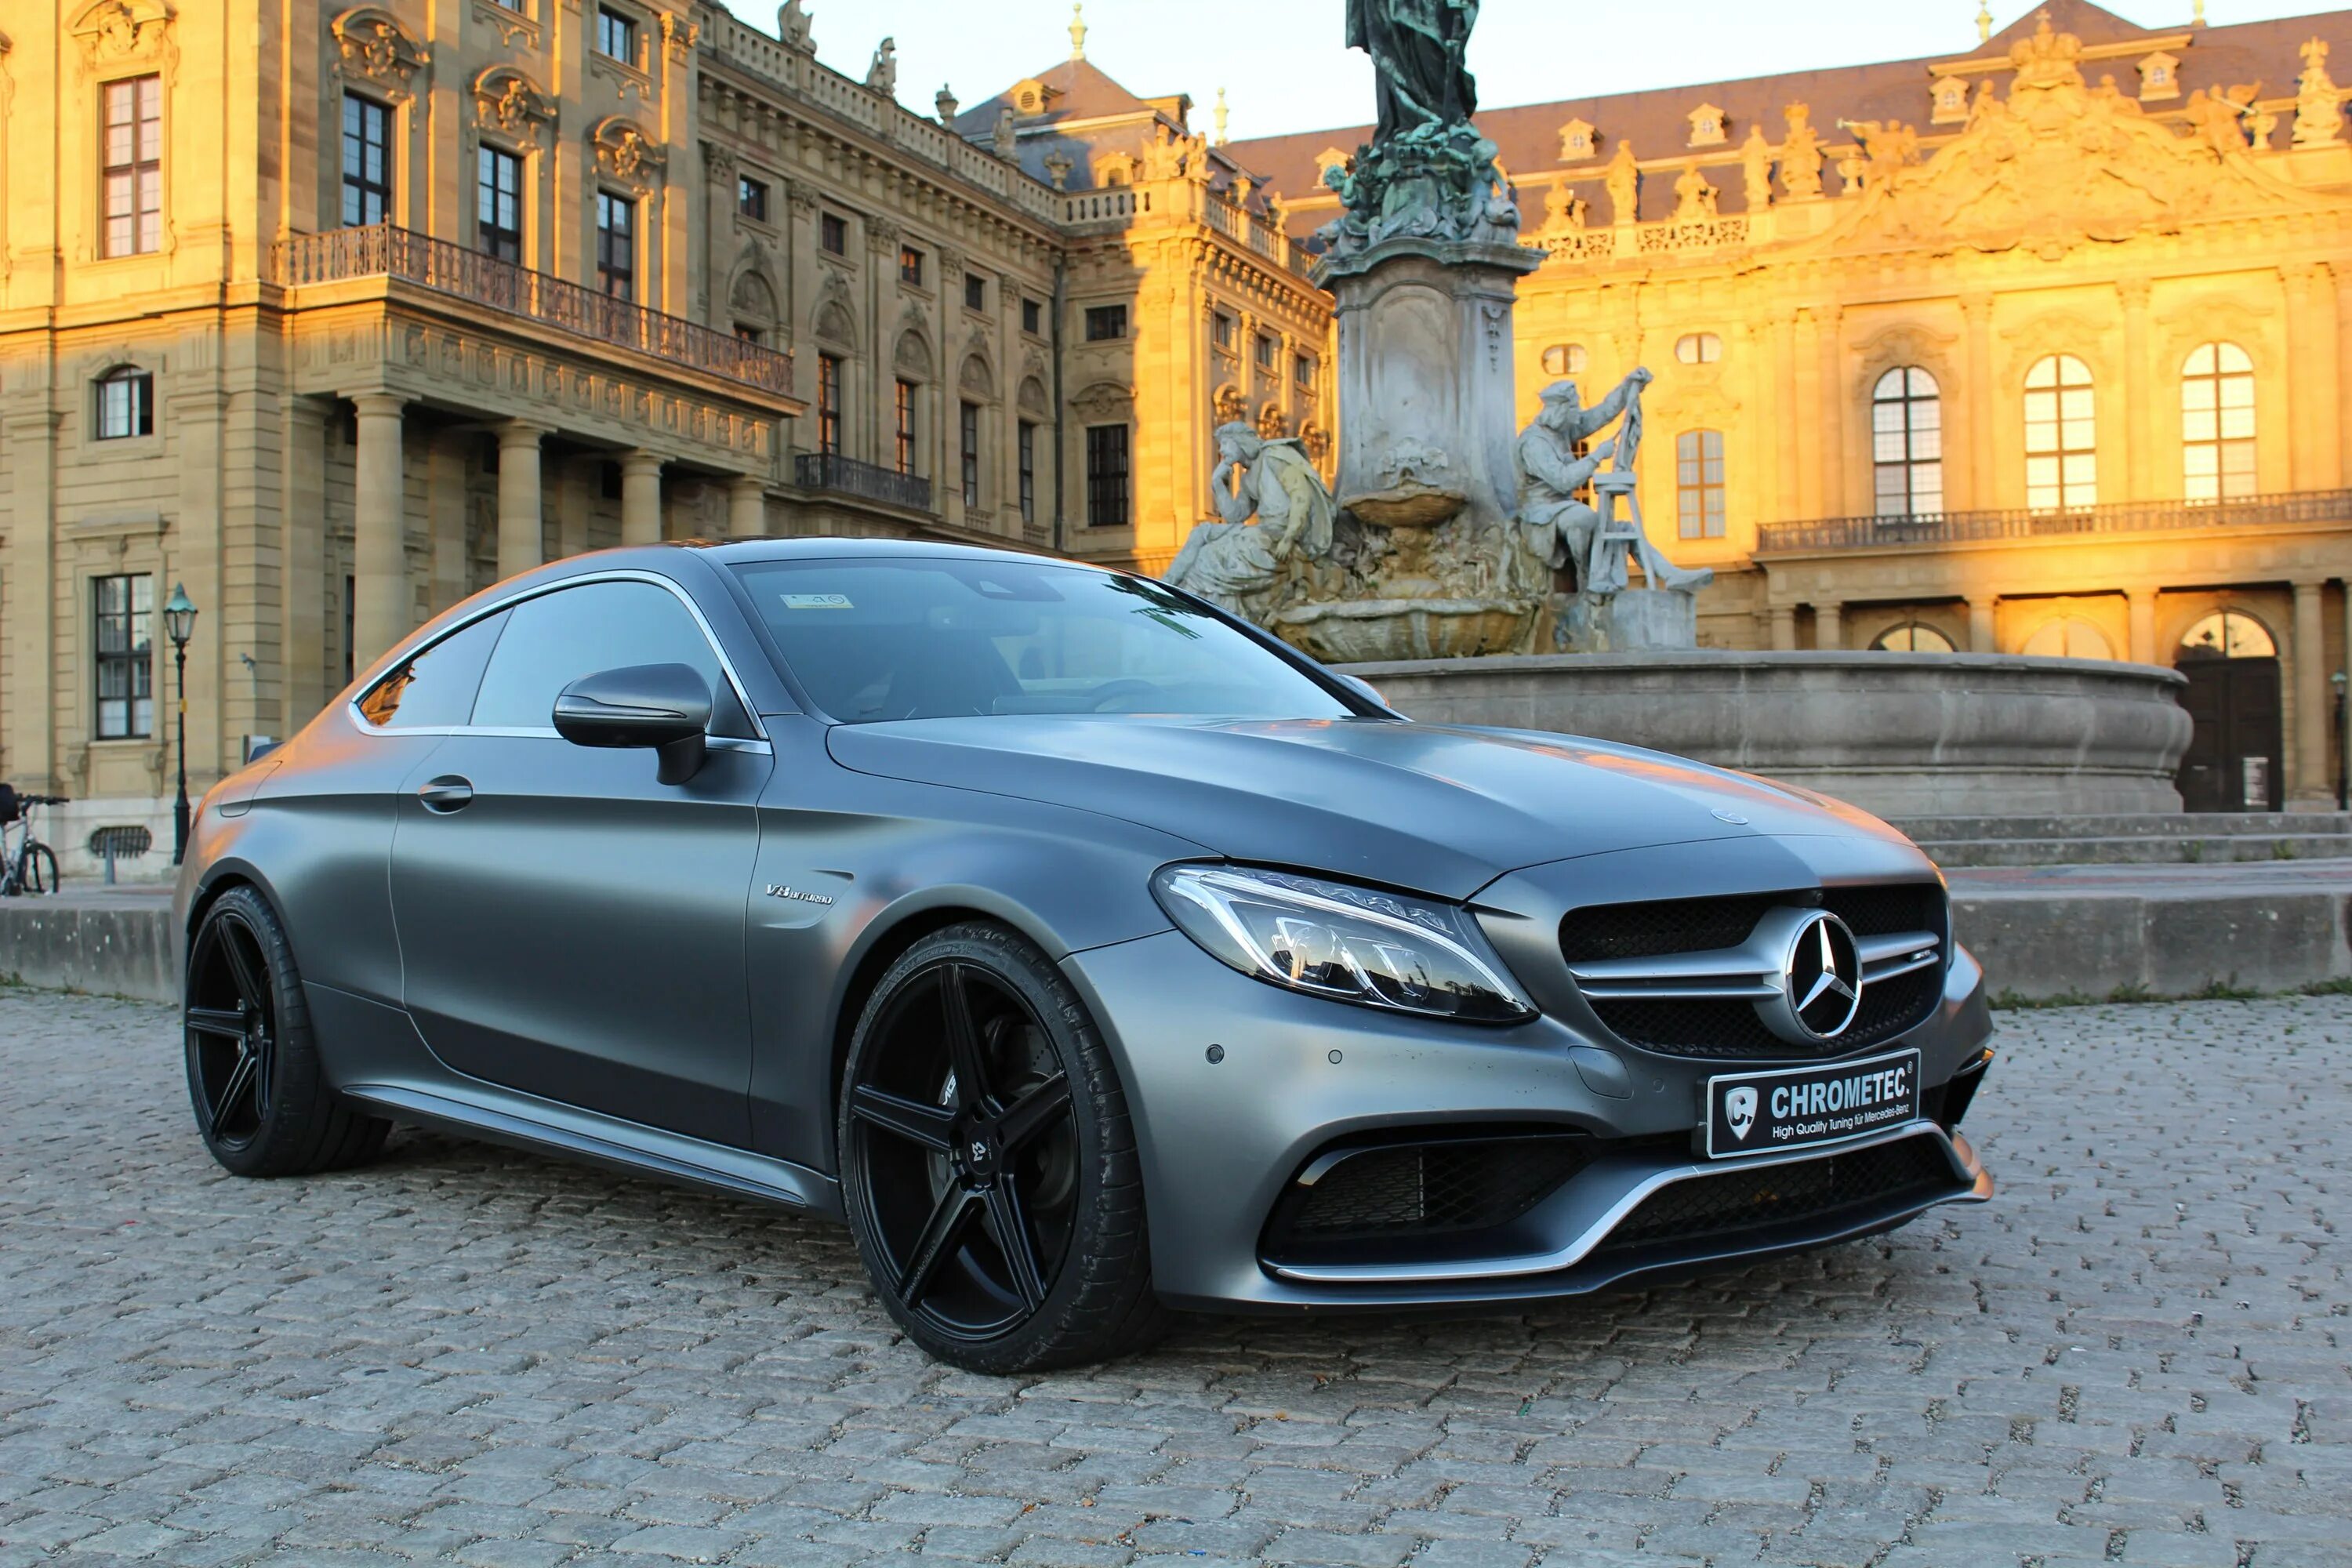 Mercedes Benz c 63 s AMG Coupe. Мерседес Бенц ц63 АМГ купе. Mercedes Benz c63 AMG Coupe. Мерседес c63 AMG купе.